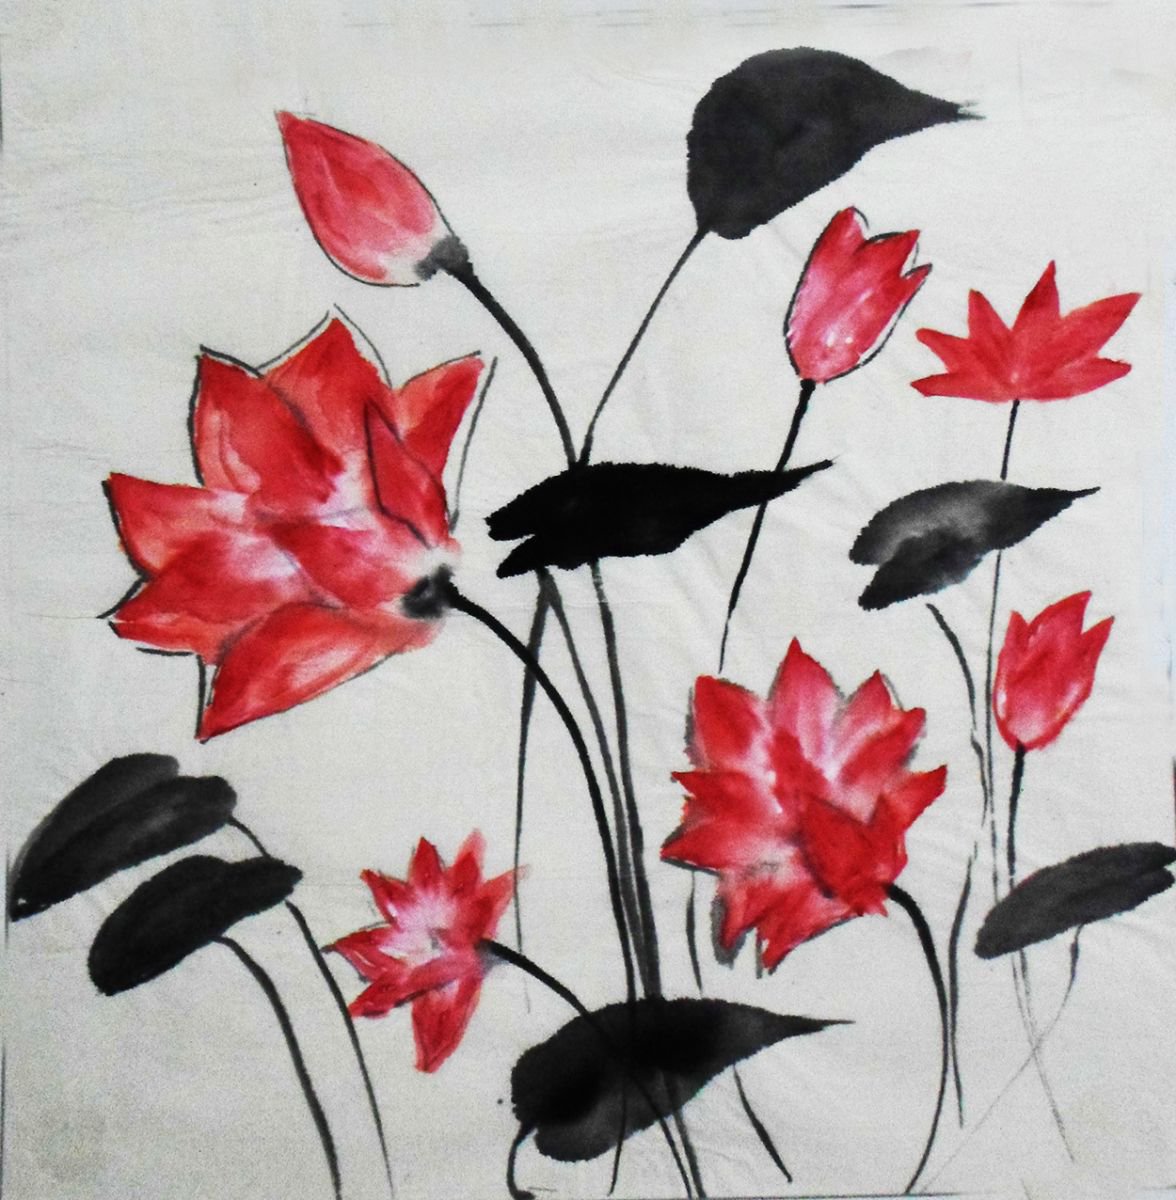 Bunch of lotus Chinese art on rice paper 13.25 x 13.25 by Asha Shenoy